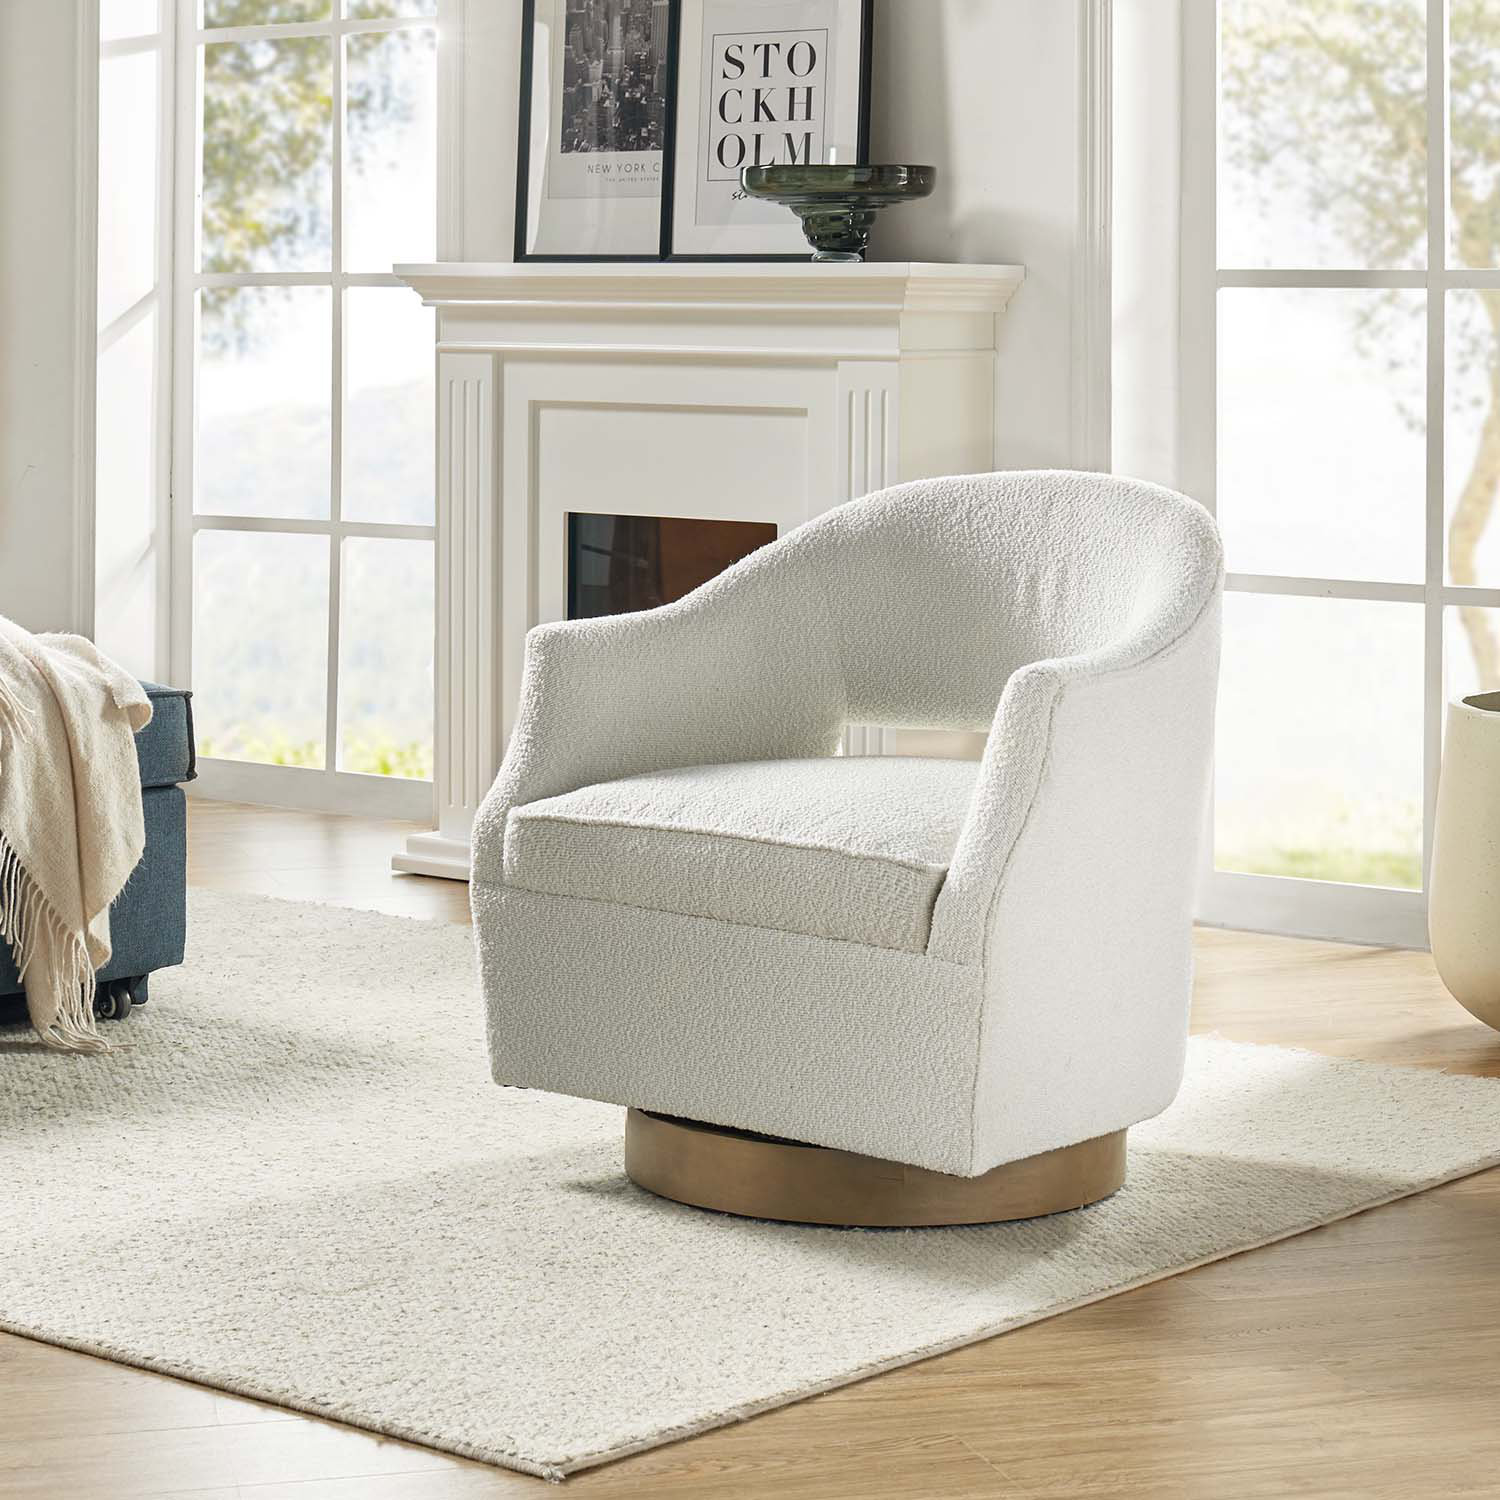 Lark Manor Aquille Upholstered Swivel Barrel Chair with Solid Wood